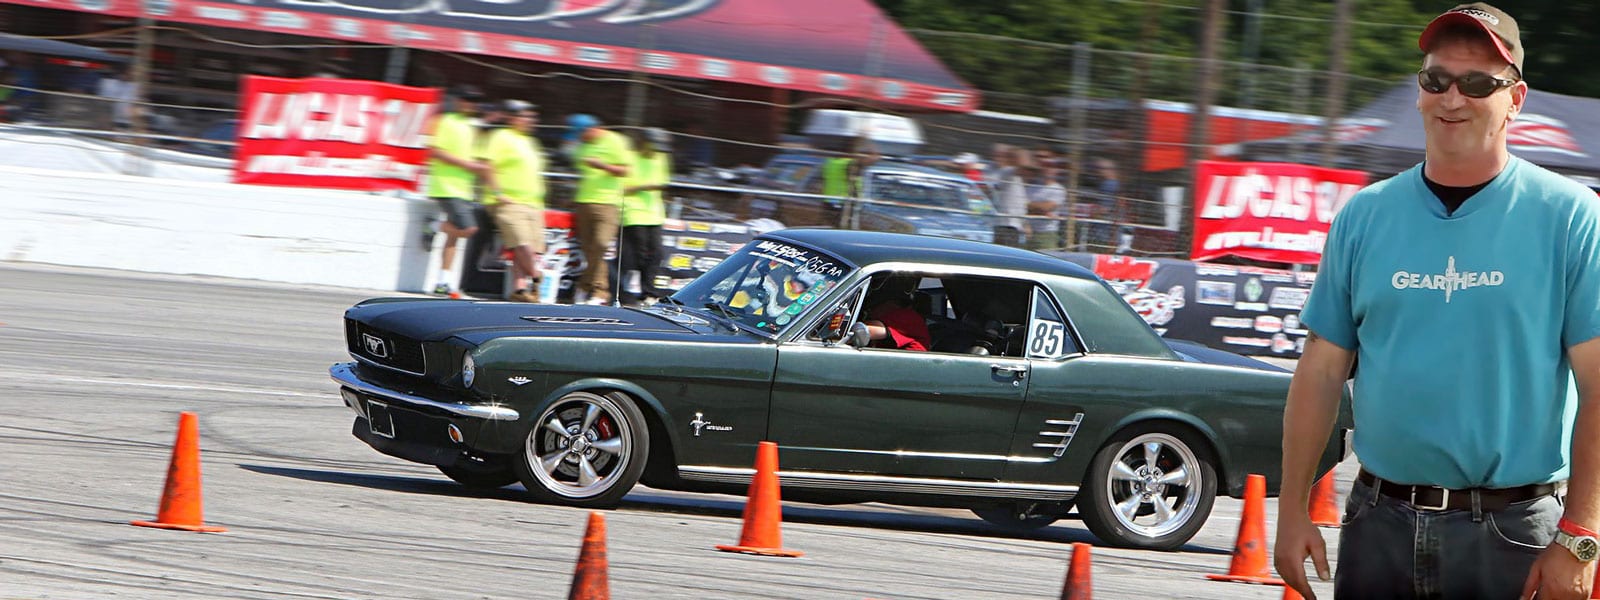 1966 Ford Mustang Mike Magnuson